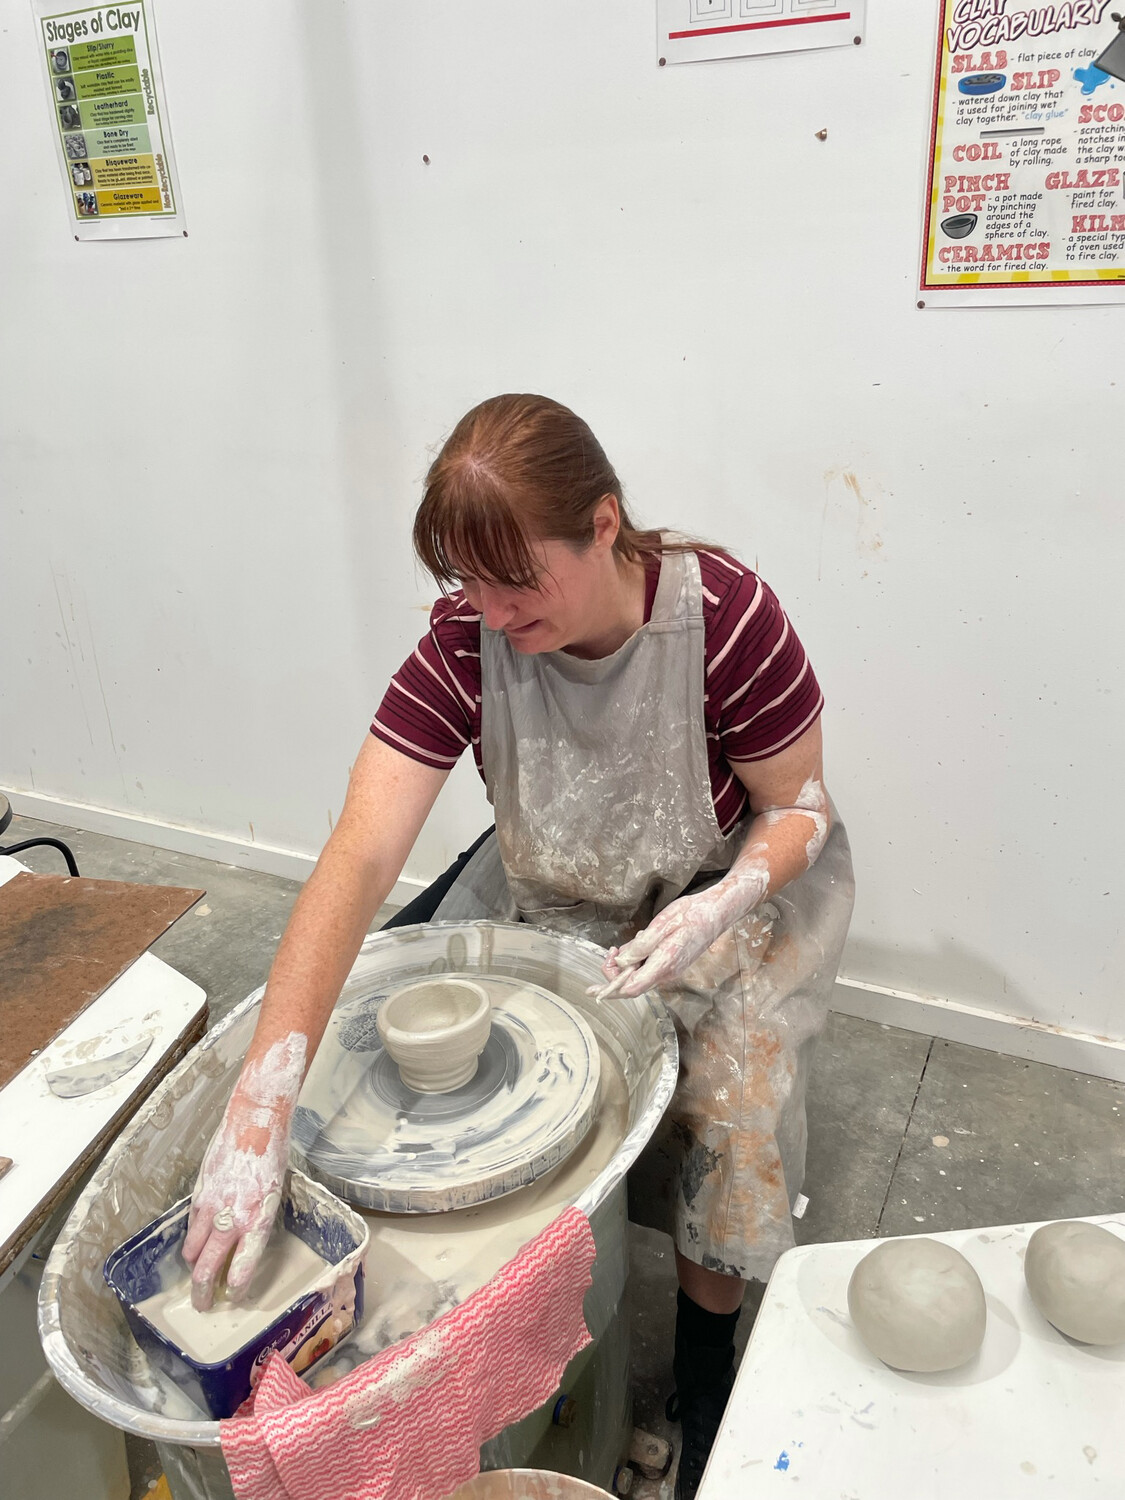 Slip, Spin & Sculpt! 4 week Pottery course Thursday 12th May 6:30pm